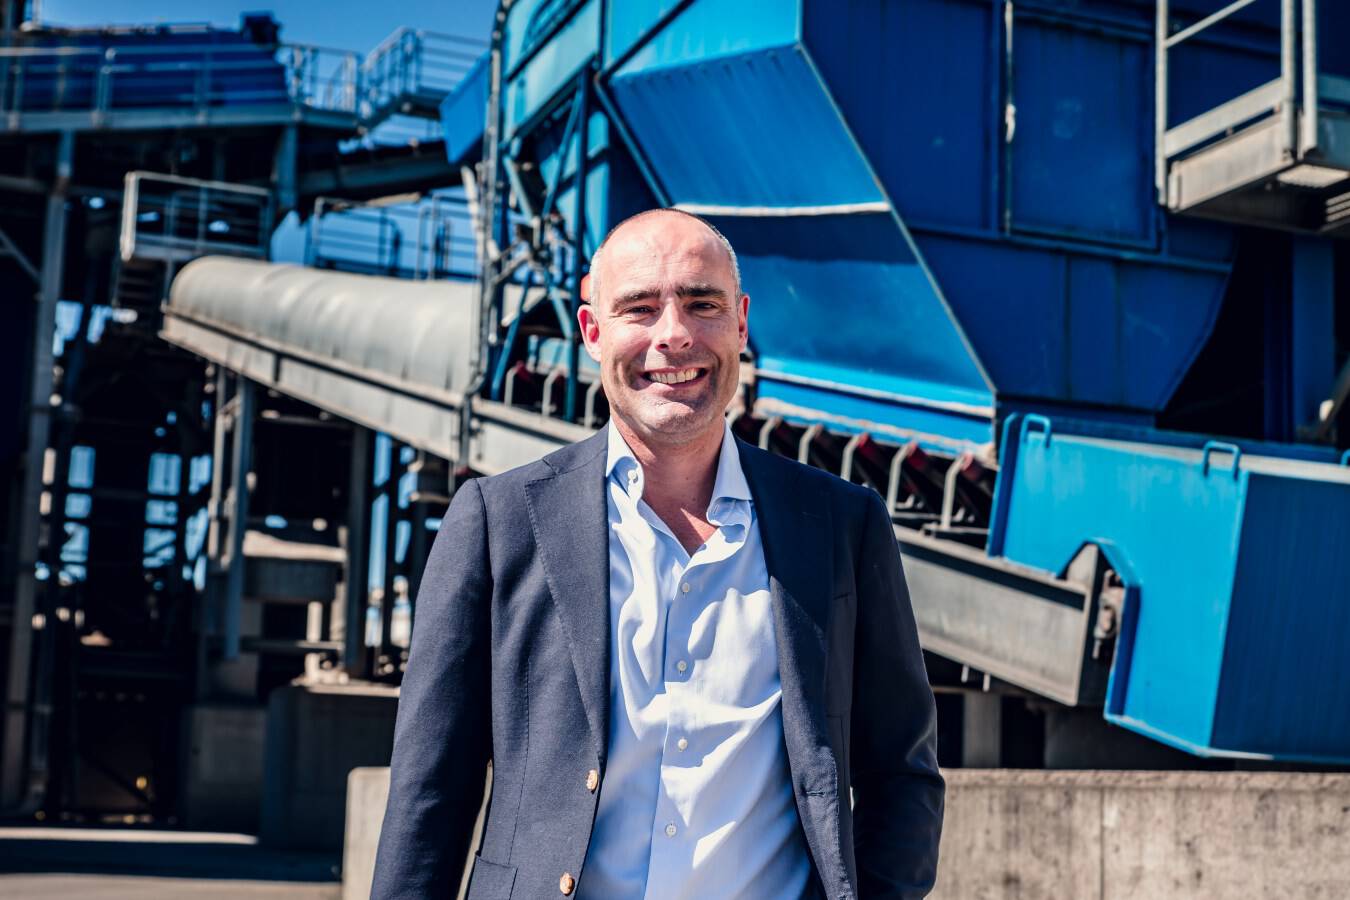 New director TBK Group Stan Egging: ’an inspired professional idiot’ Steady growth, further professionalisation and international expansion. With Stan Egging (45), TBK Group aims to develop into a total solution provider in the field of innovative solutions for conveyor belt components and bulk material handling.